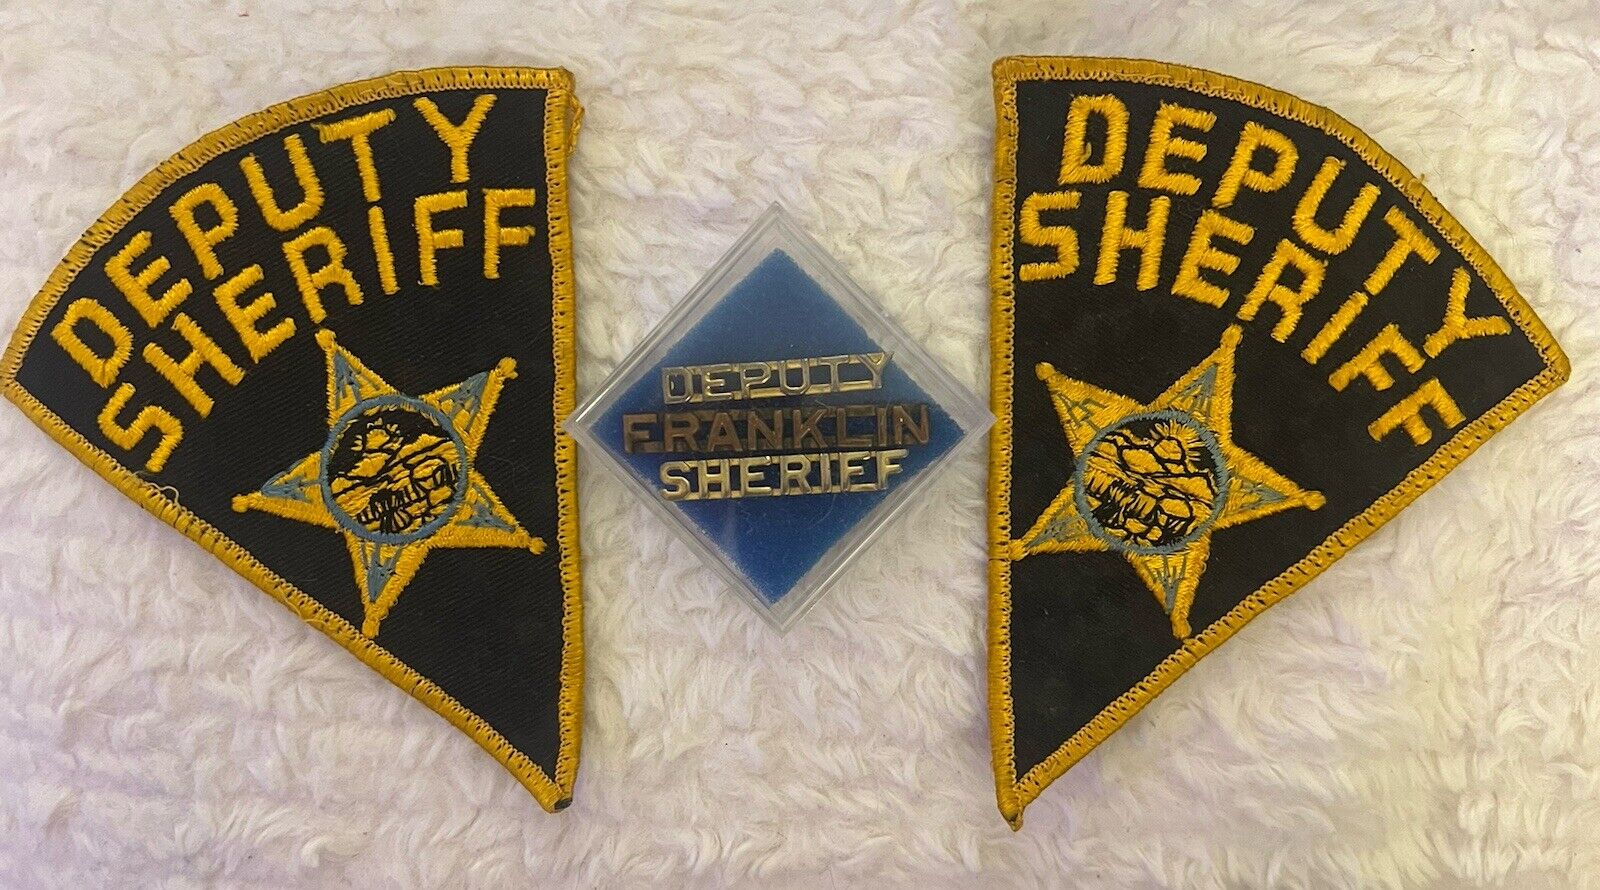 Vintage Franklin County Ohio Deputy Sheriff Shoulder Patches & Tie Pins